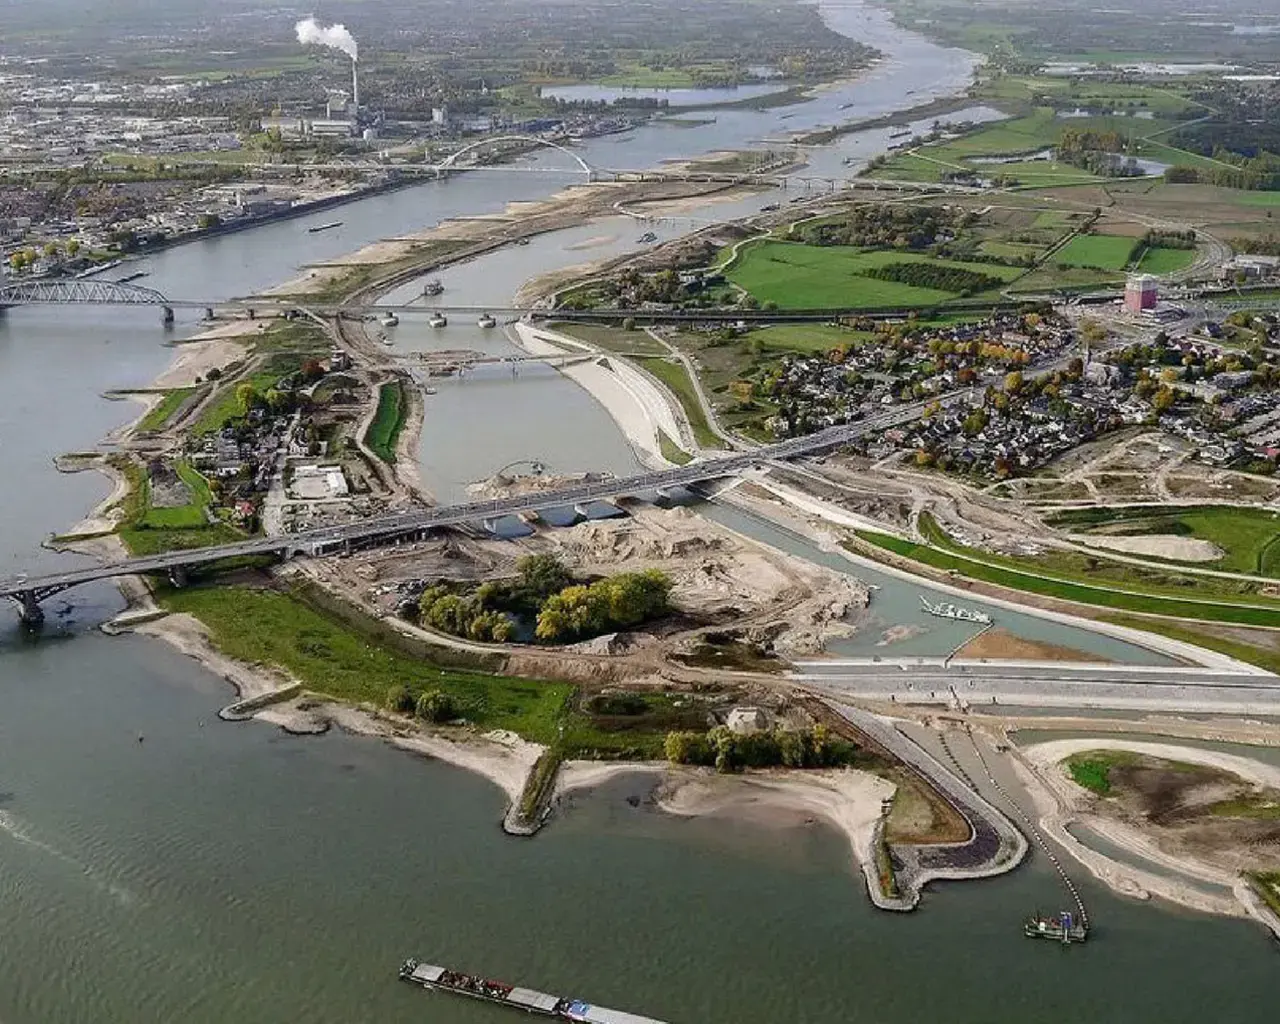 Design With Nature Now, H+N+S, Landscape Architects, Room for the River at Nijmegen, 2016, bird’s-eye view. Photo courtesy of H+N+S, Landscape Architects.